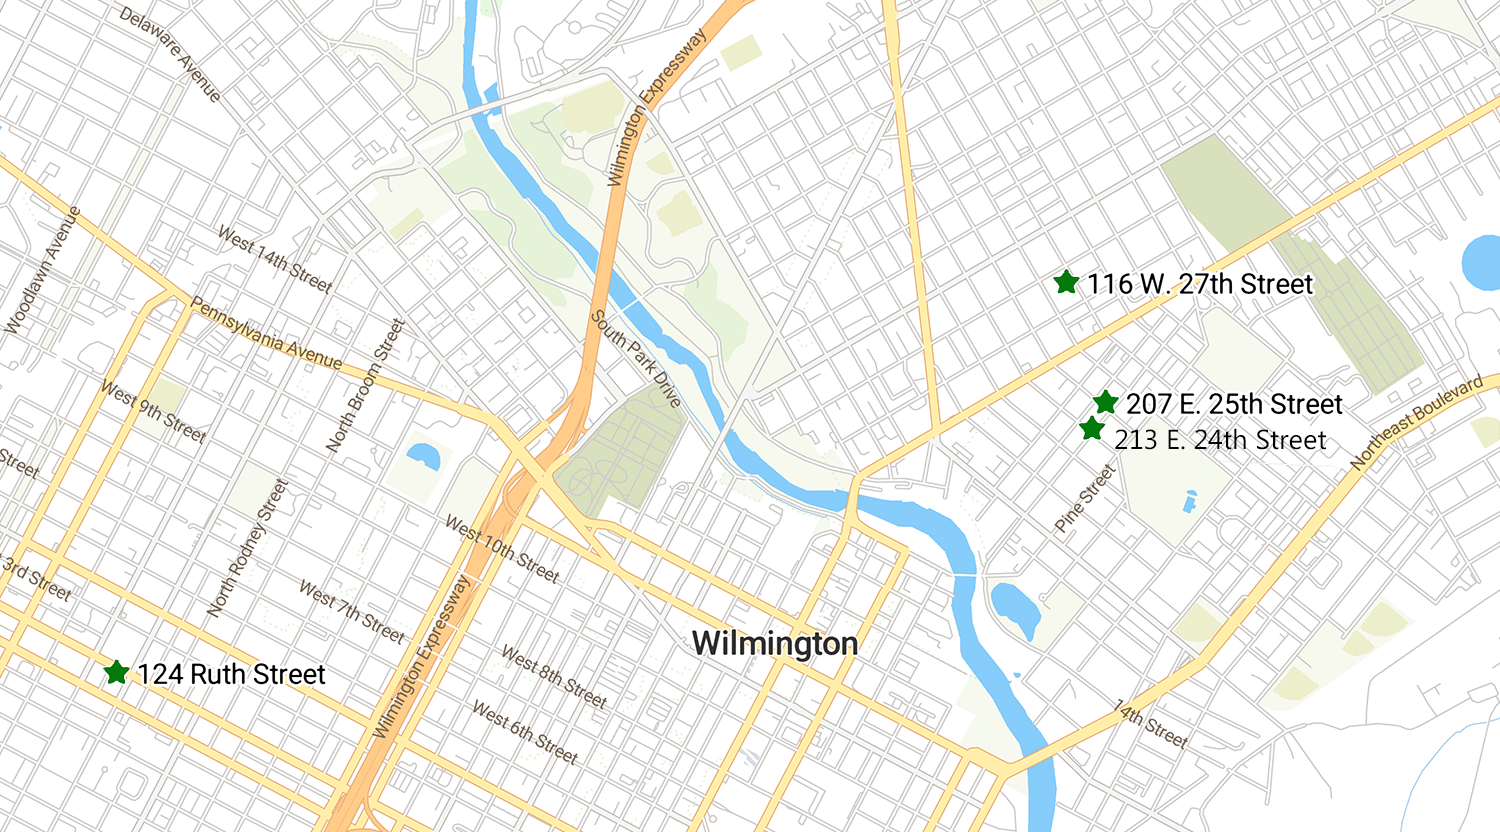 Map of Wilmington DE with 4 stars showing available properties